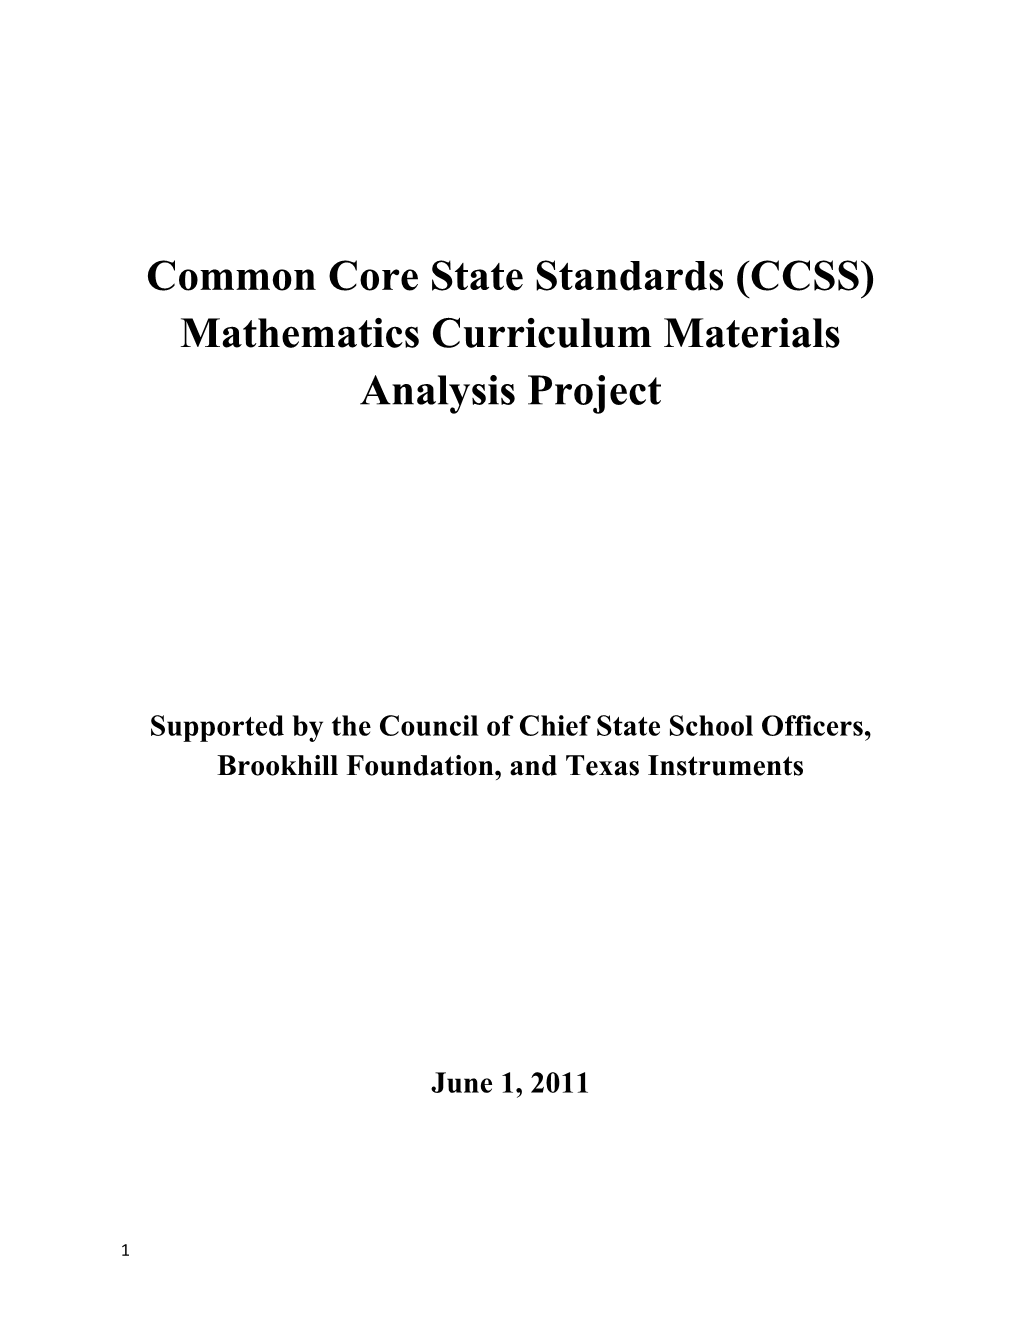 Common Core State Standards (CCSS) Mathematics Curriculum Materials Analysis Project